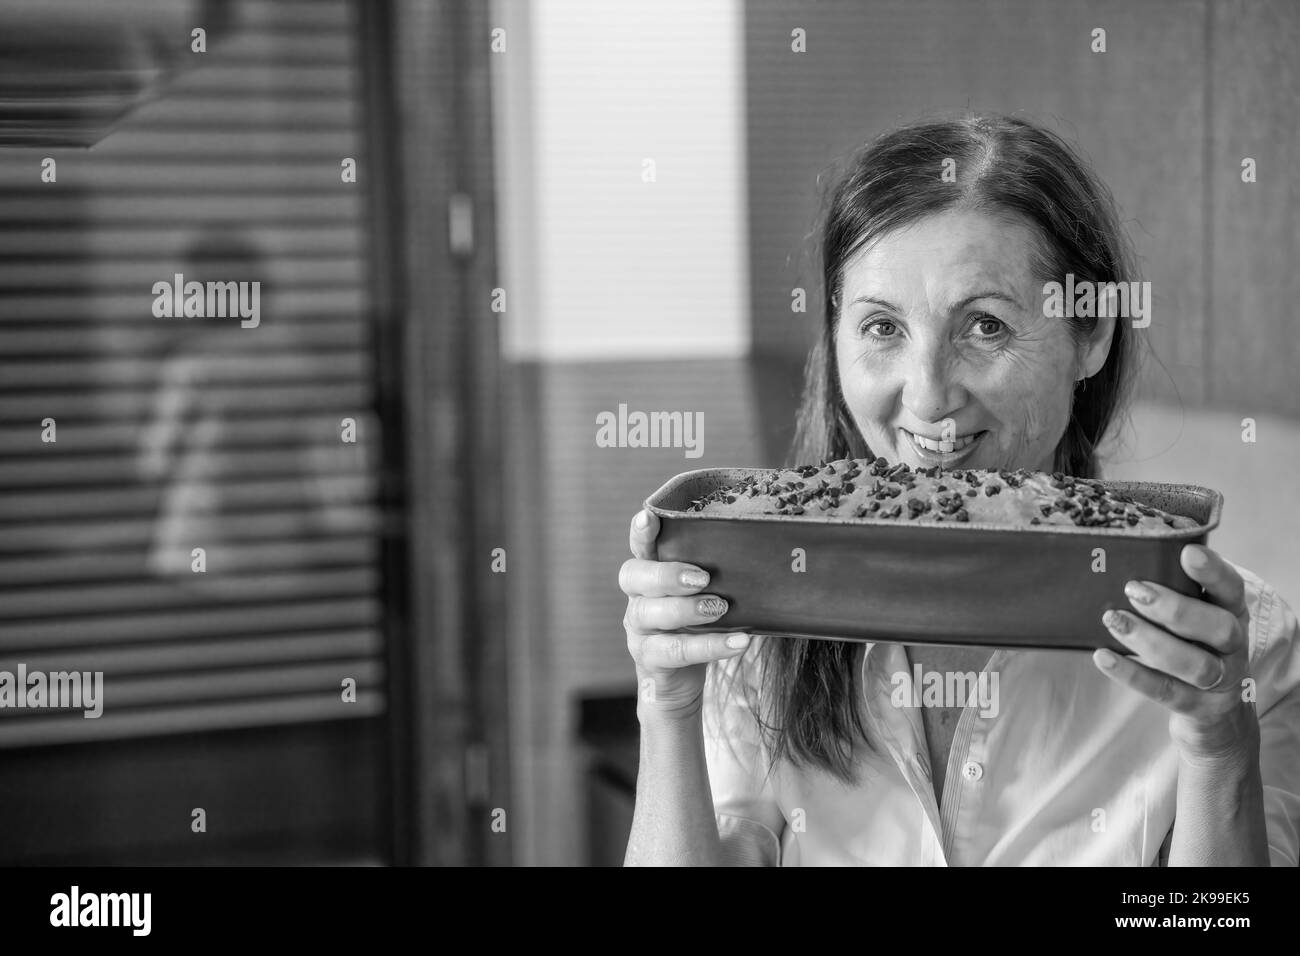 Happy woman holding a board with a tasteful cake and sniffing the homemade cake. Stock Photo